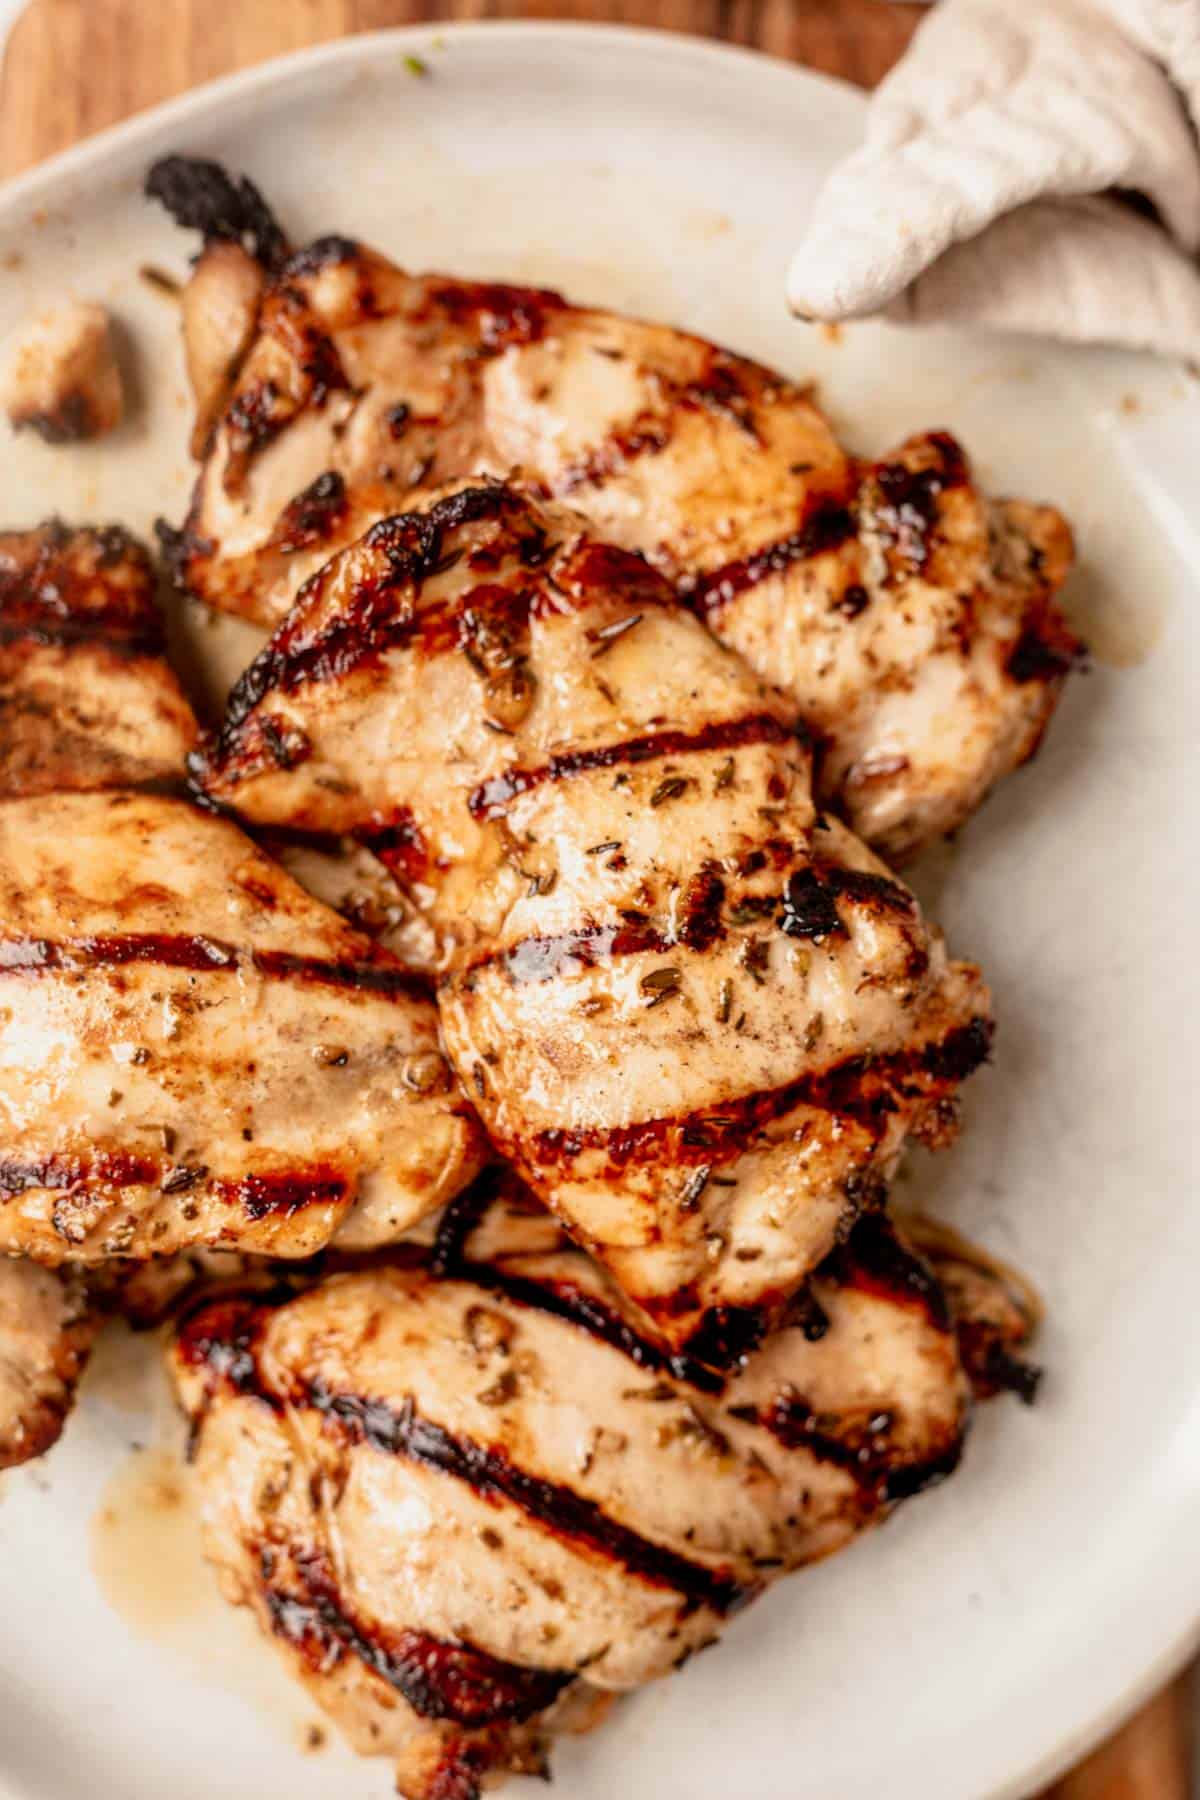 https://whatmollymade.com/wp-content/uploads/2023/06/how-long-to-grill-chicken-thighs-6-1.jpg